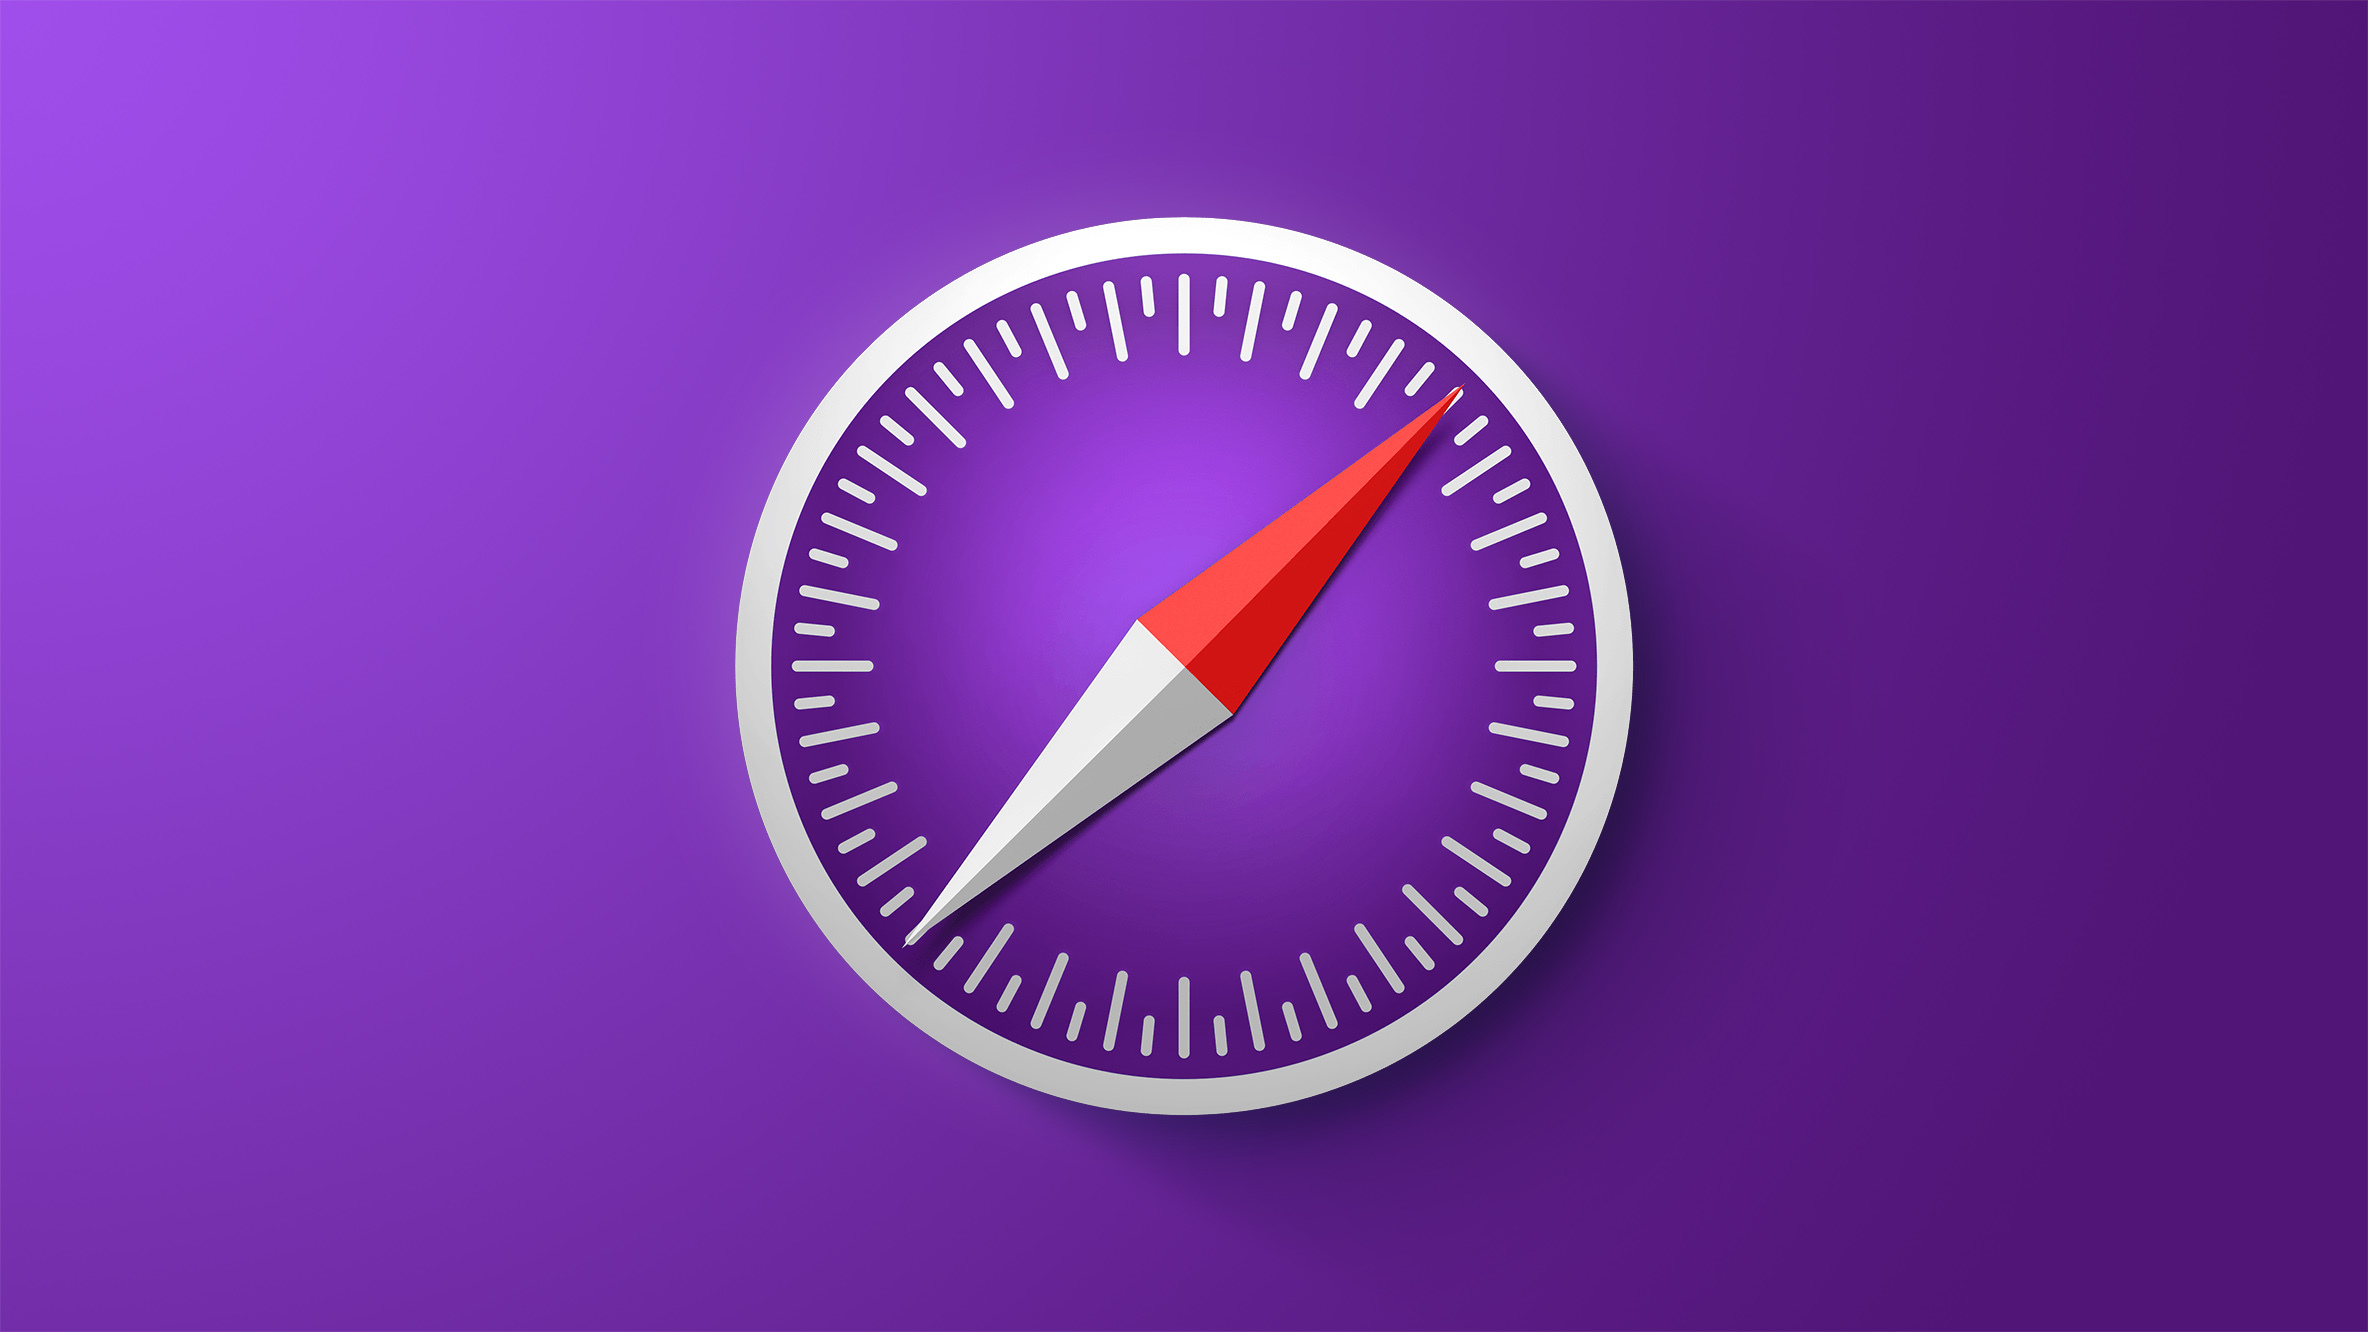 Apple Releases Safari Technology Preview 158 With Bug Fixes and Performance Improvements